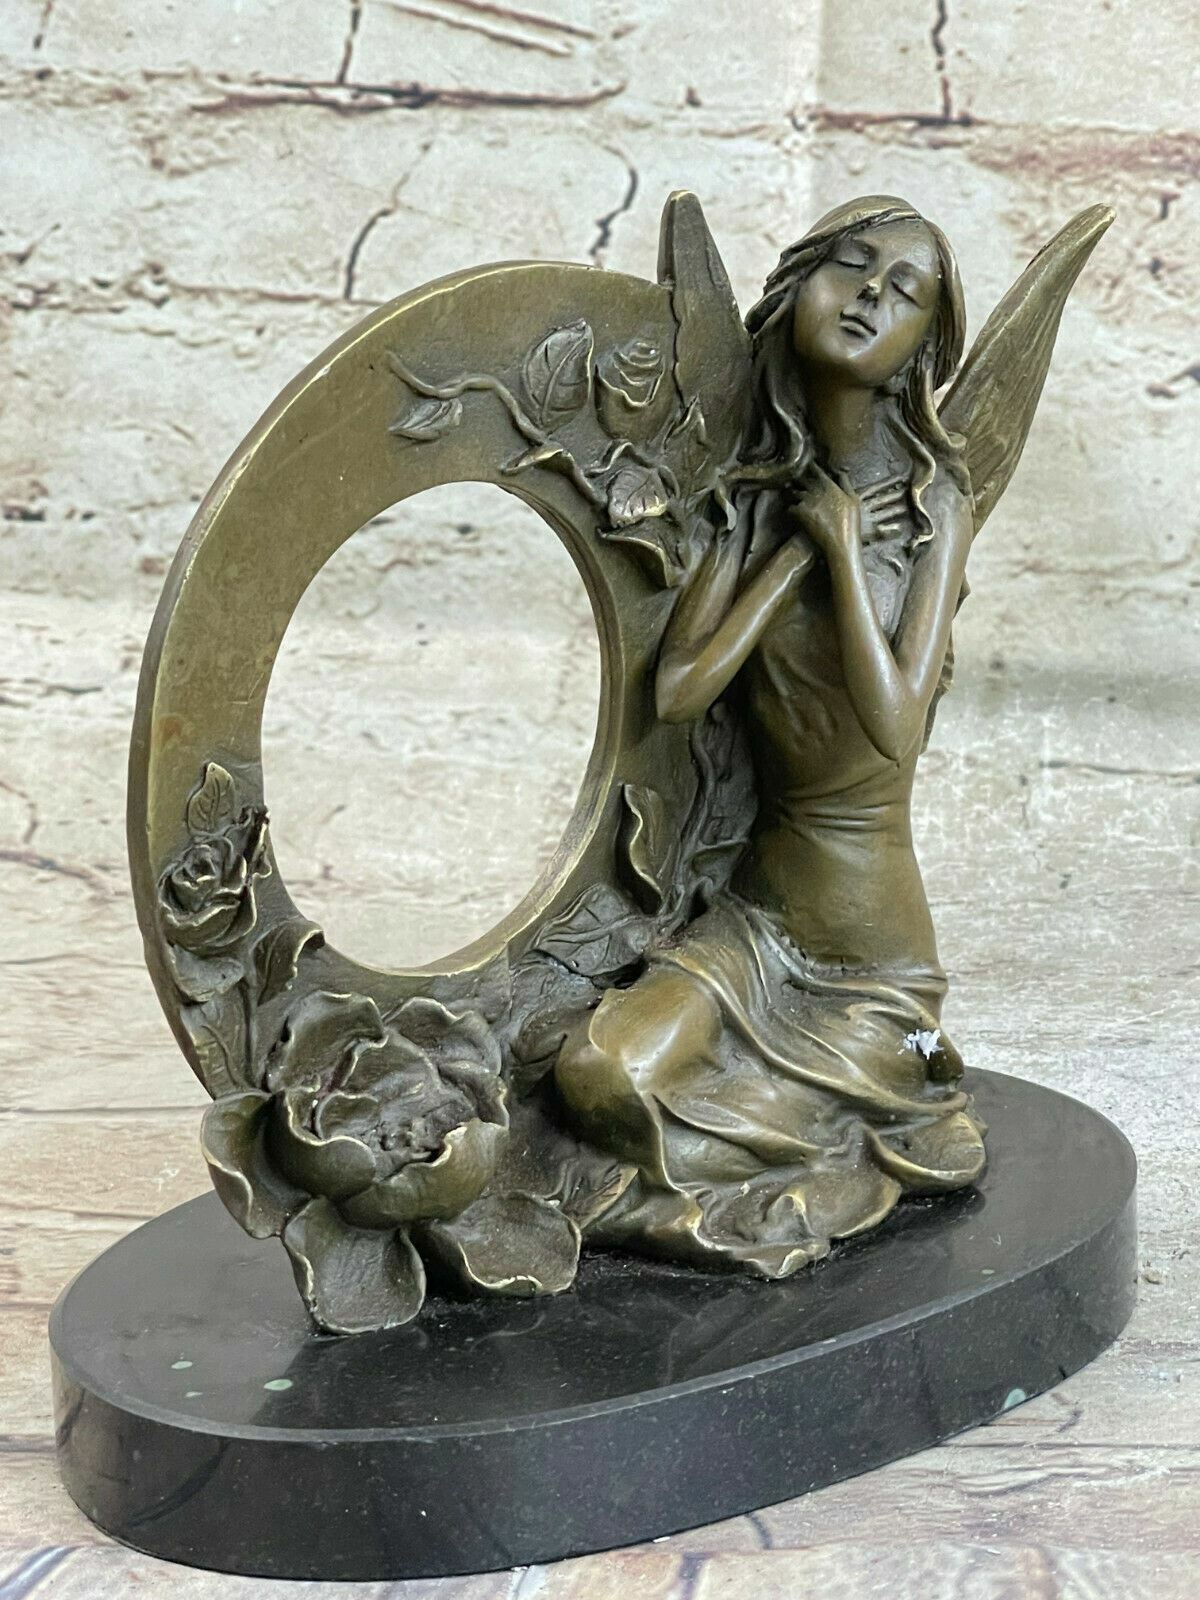 BEAUTIFUL FRENCH FIGURAL BRONZE OF FAIRY GIRL NYMPH SIGNED BY MOREAU SCULPTURE